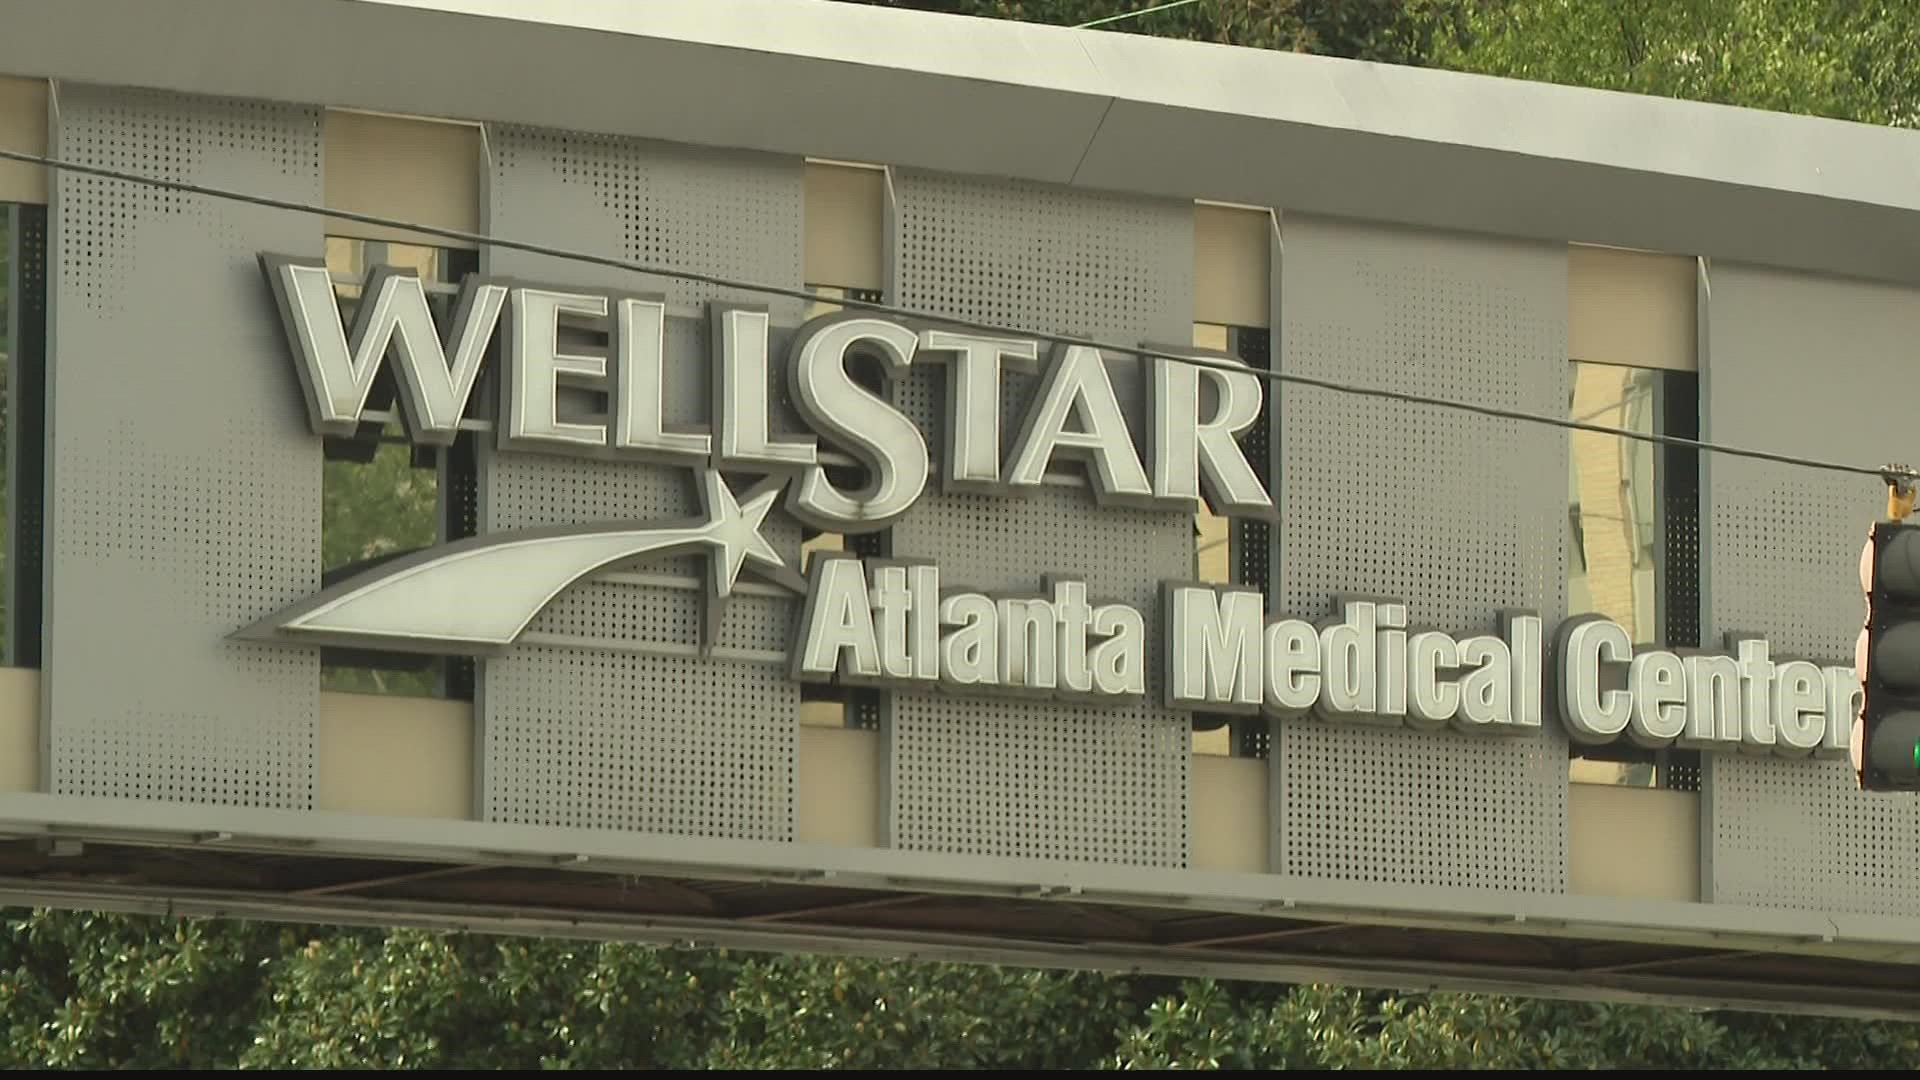 Hundreds of Wellstar Atlanta Medical Center patients are worried about what will come next as AMC announced its closure.